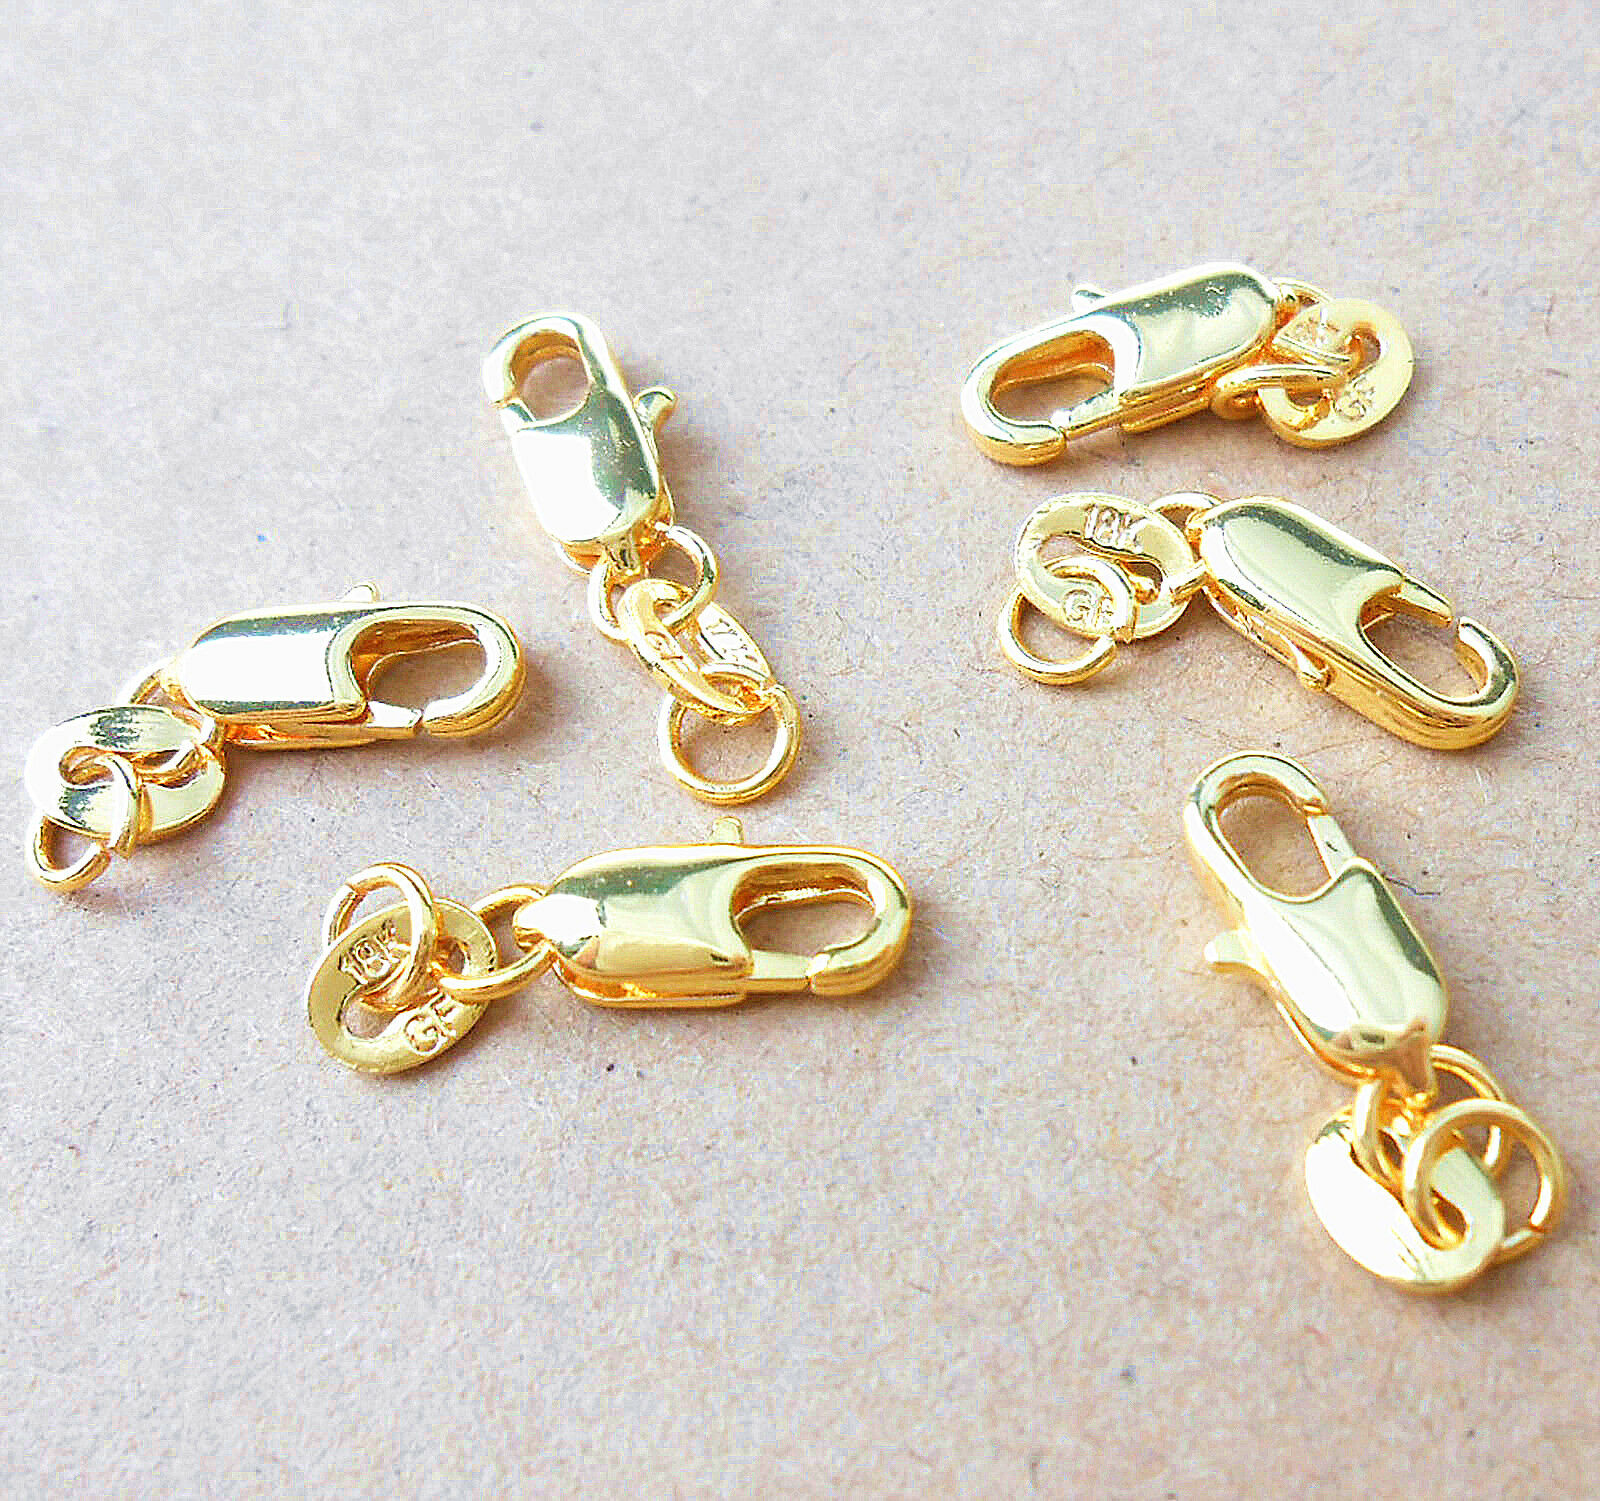 Wholesale Diy 10pcs Jewelry Findings 18k Yellow Gold Filled Gf Lobster Clasps